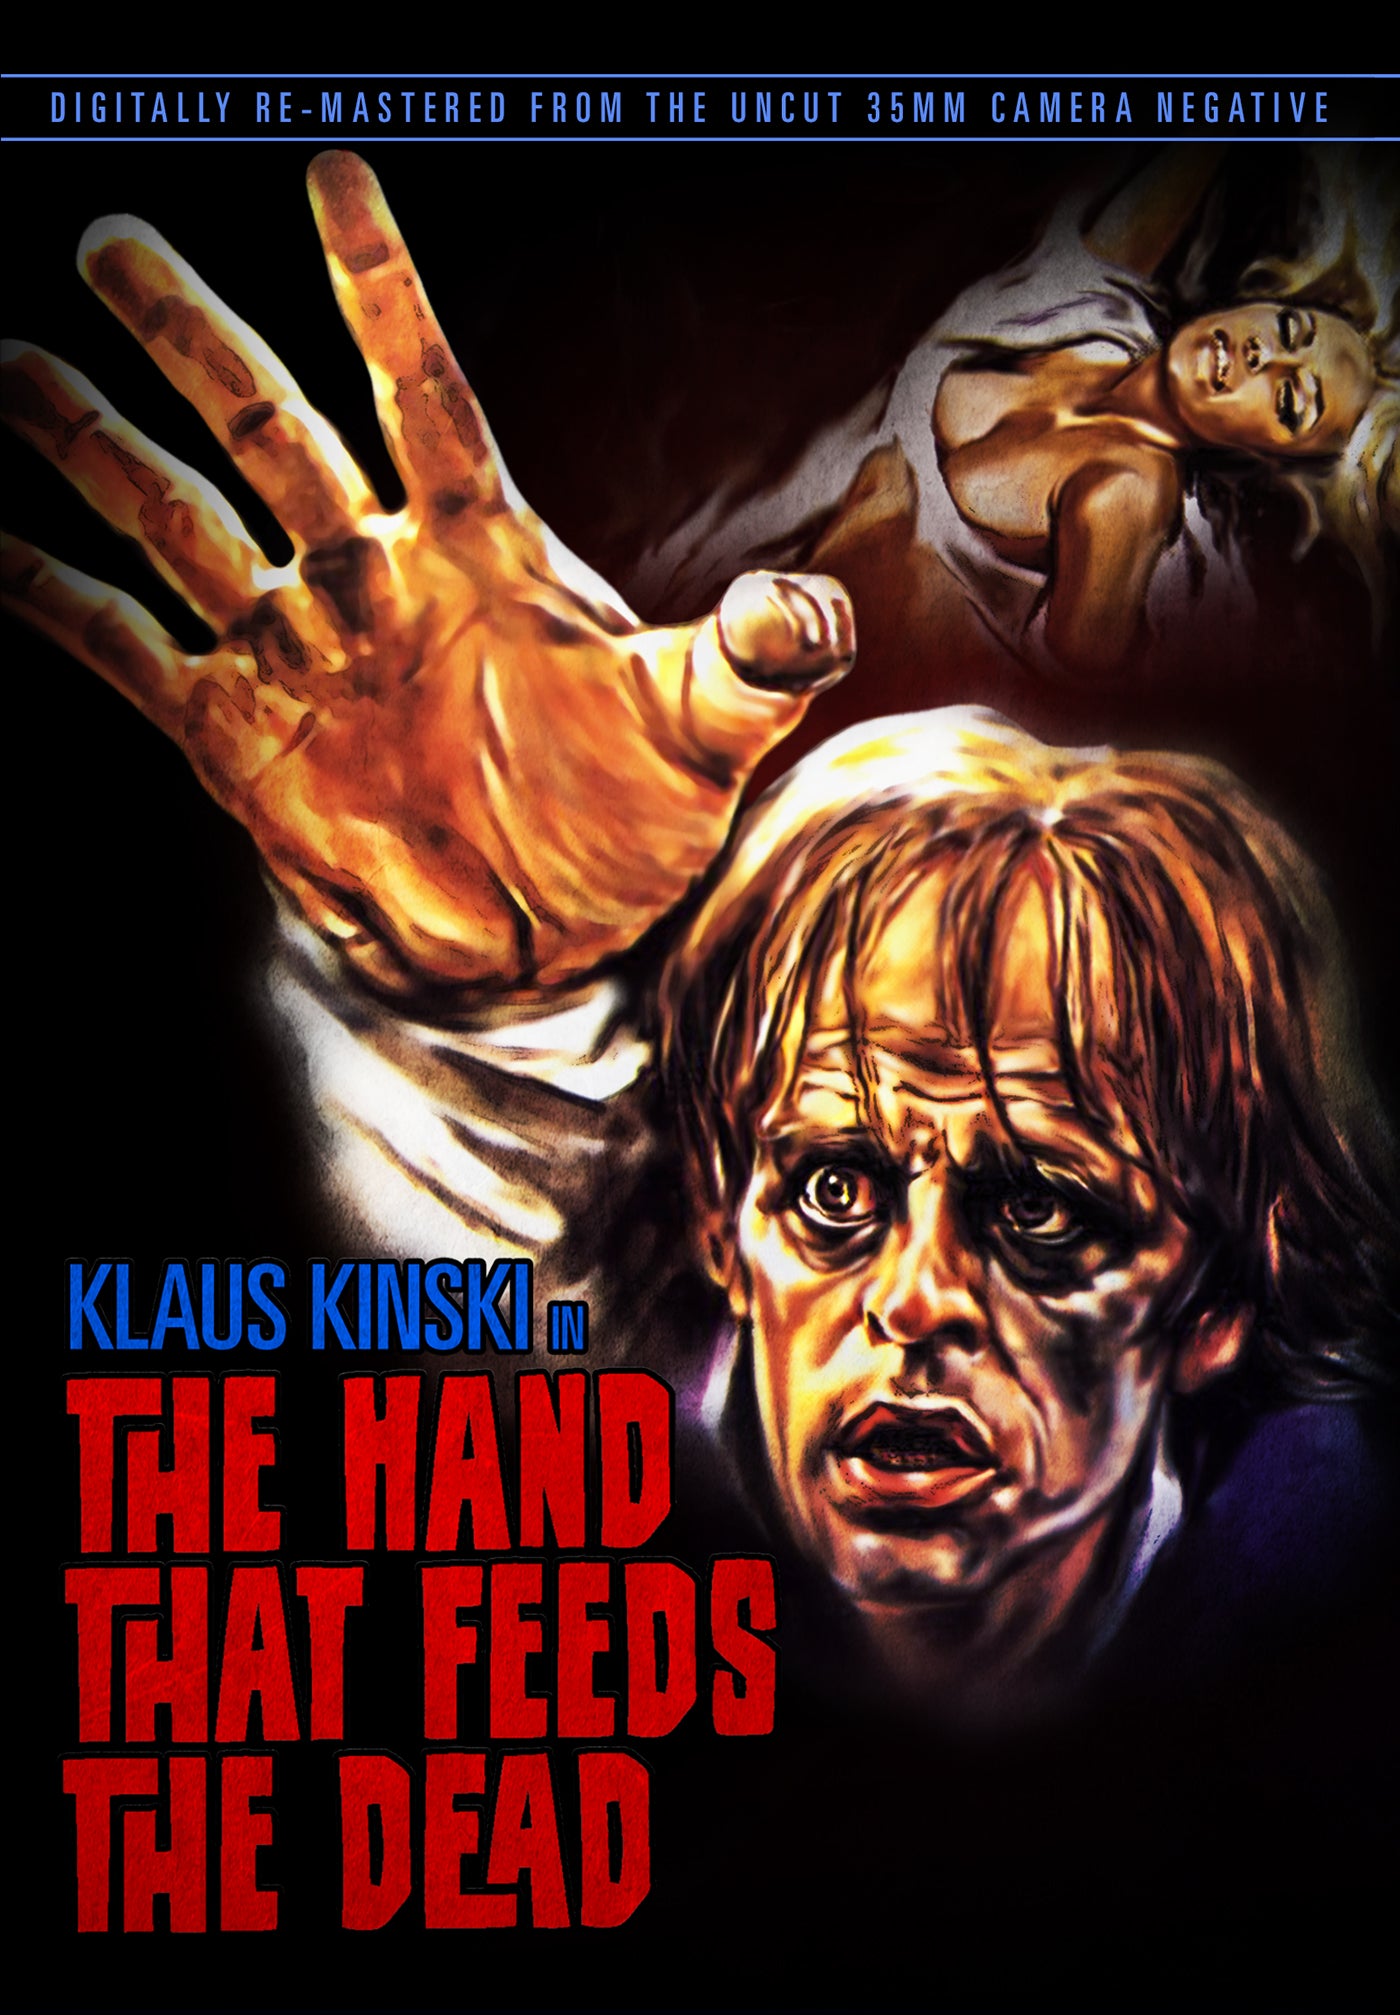 THE HAND THAT FEEDS THE DEAD DVD